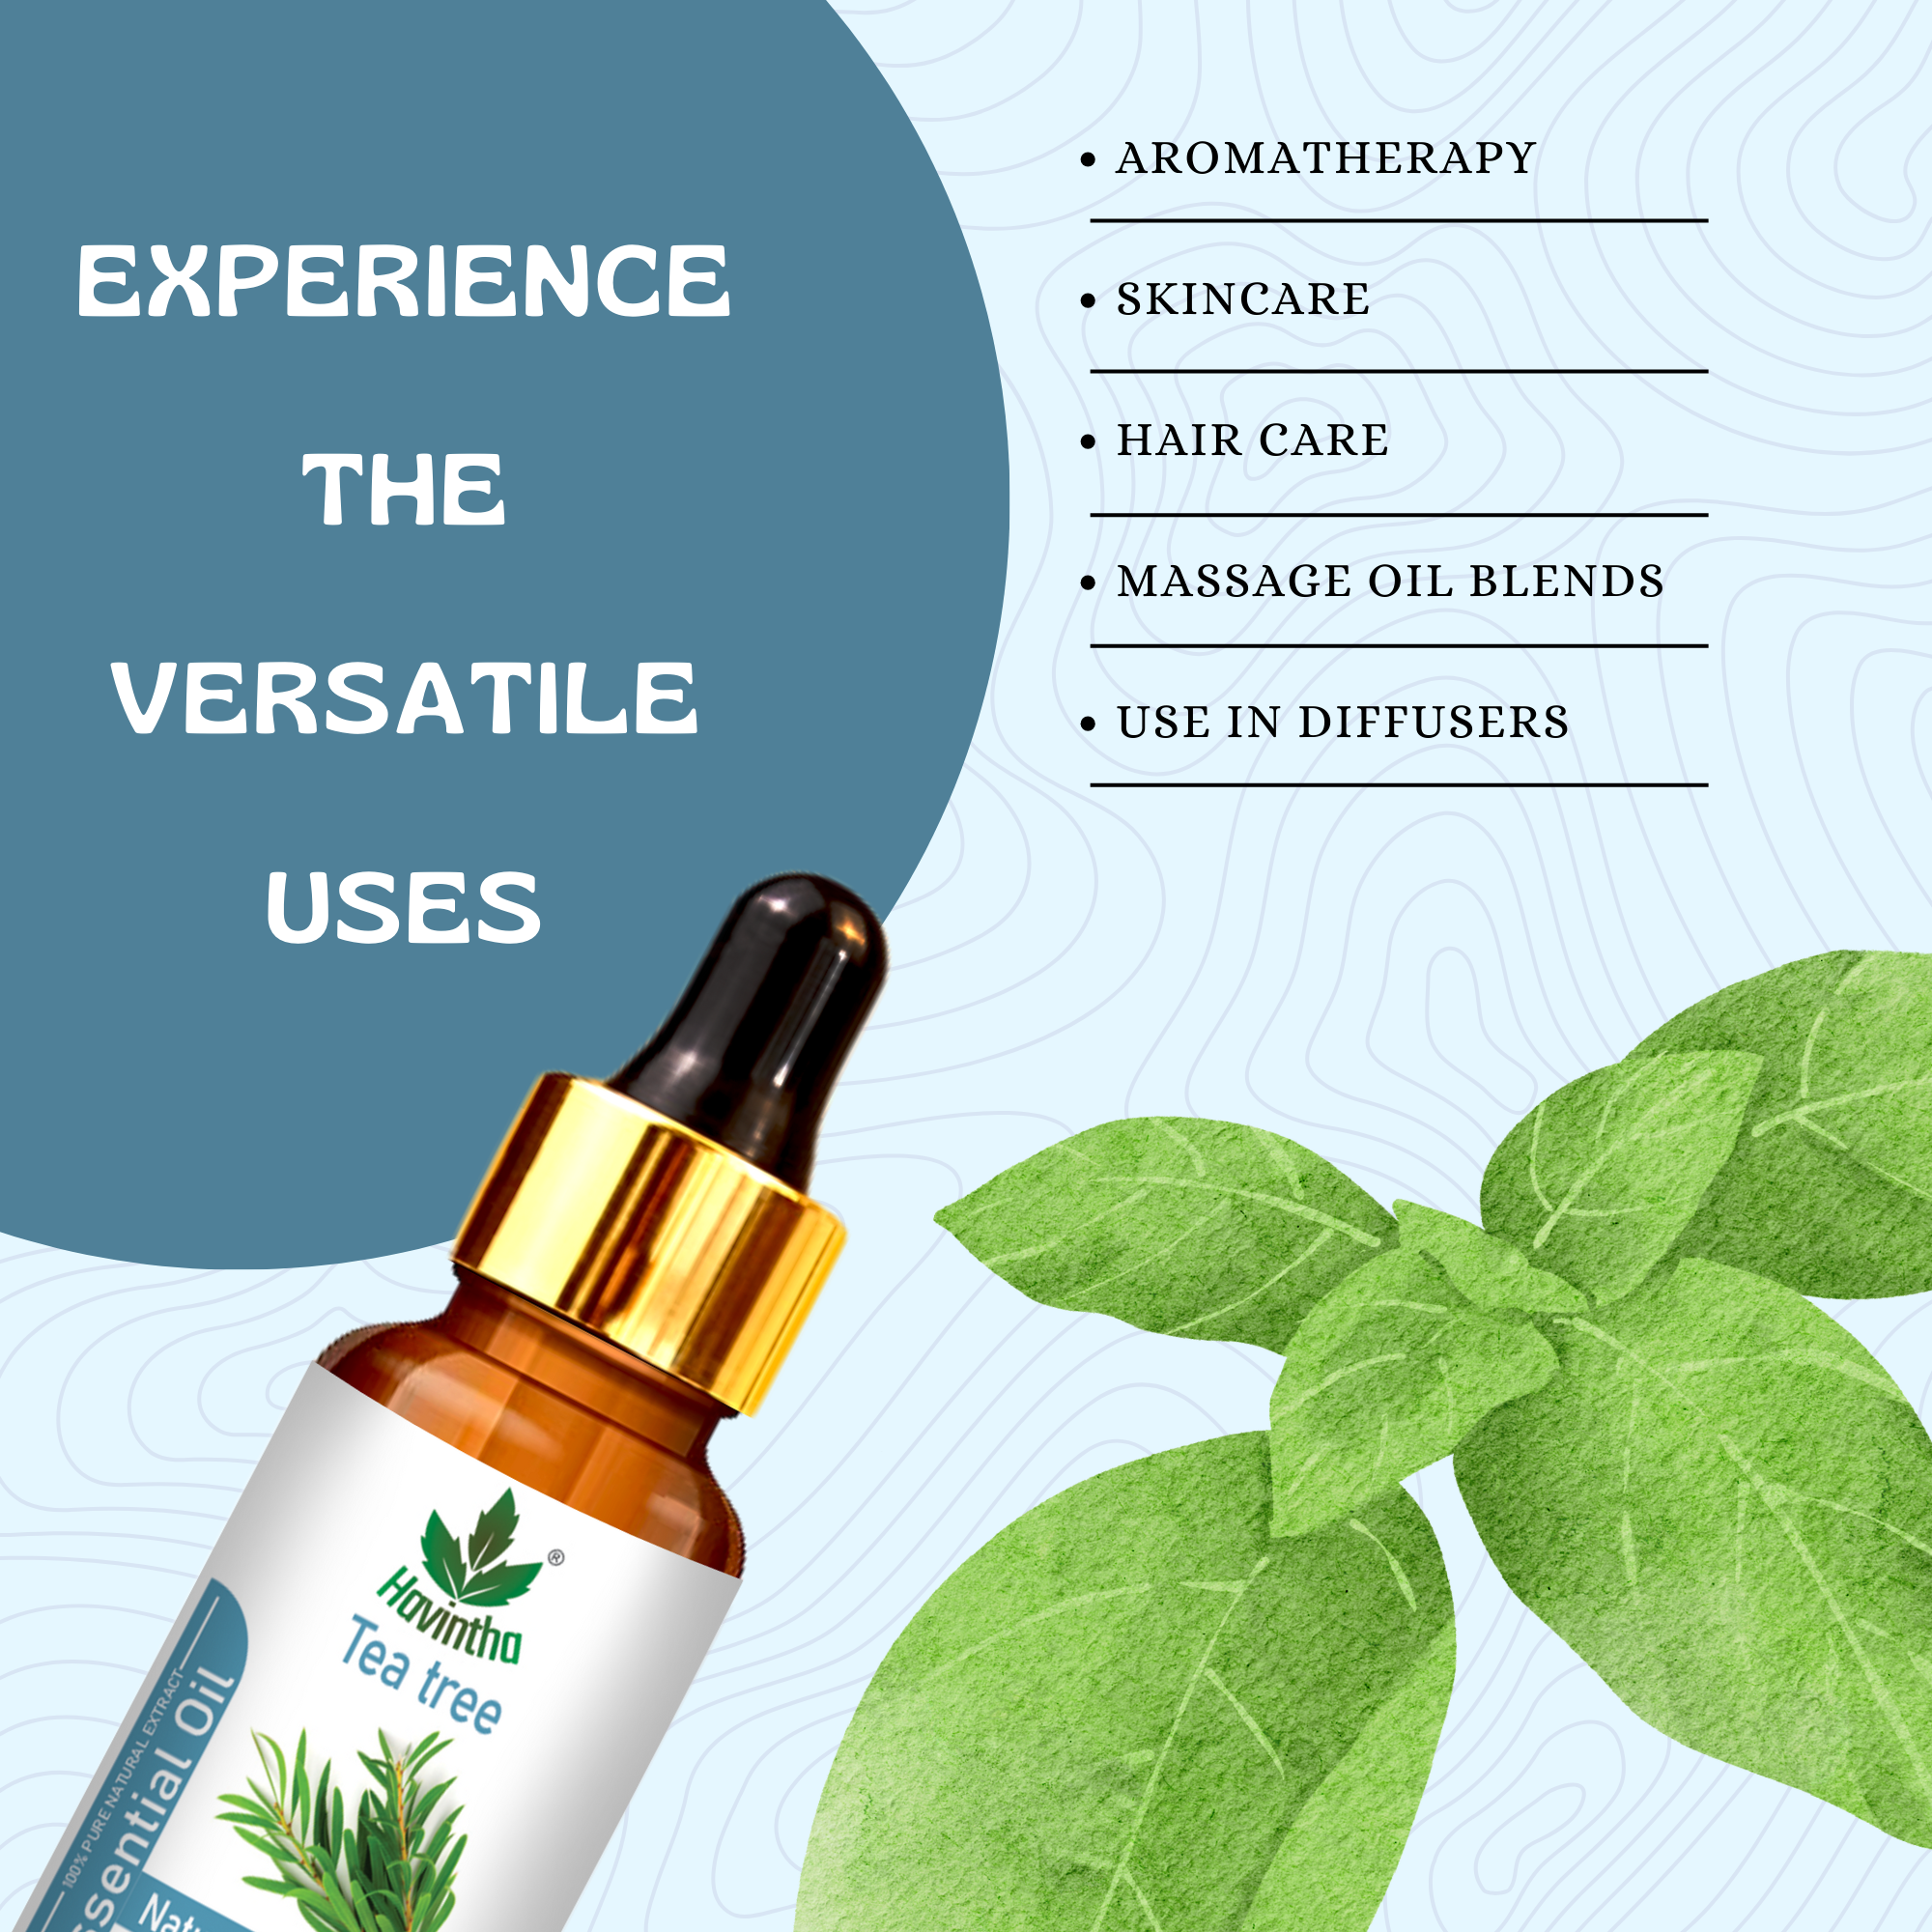 Havintha Tea Tree Essential Oil For Healthy and Glowing Skin, Acne, Dark spots and Reducing Dandruff | Pure and Organic-15 ml.